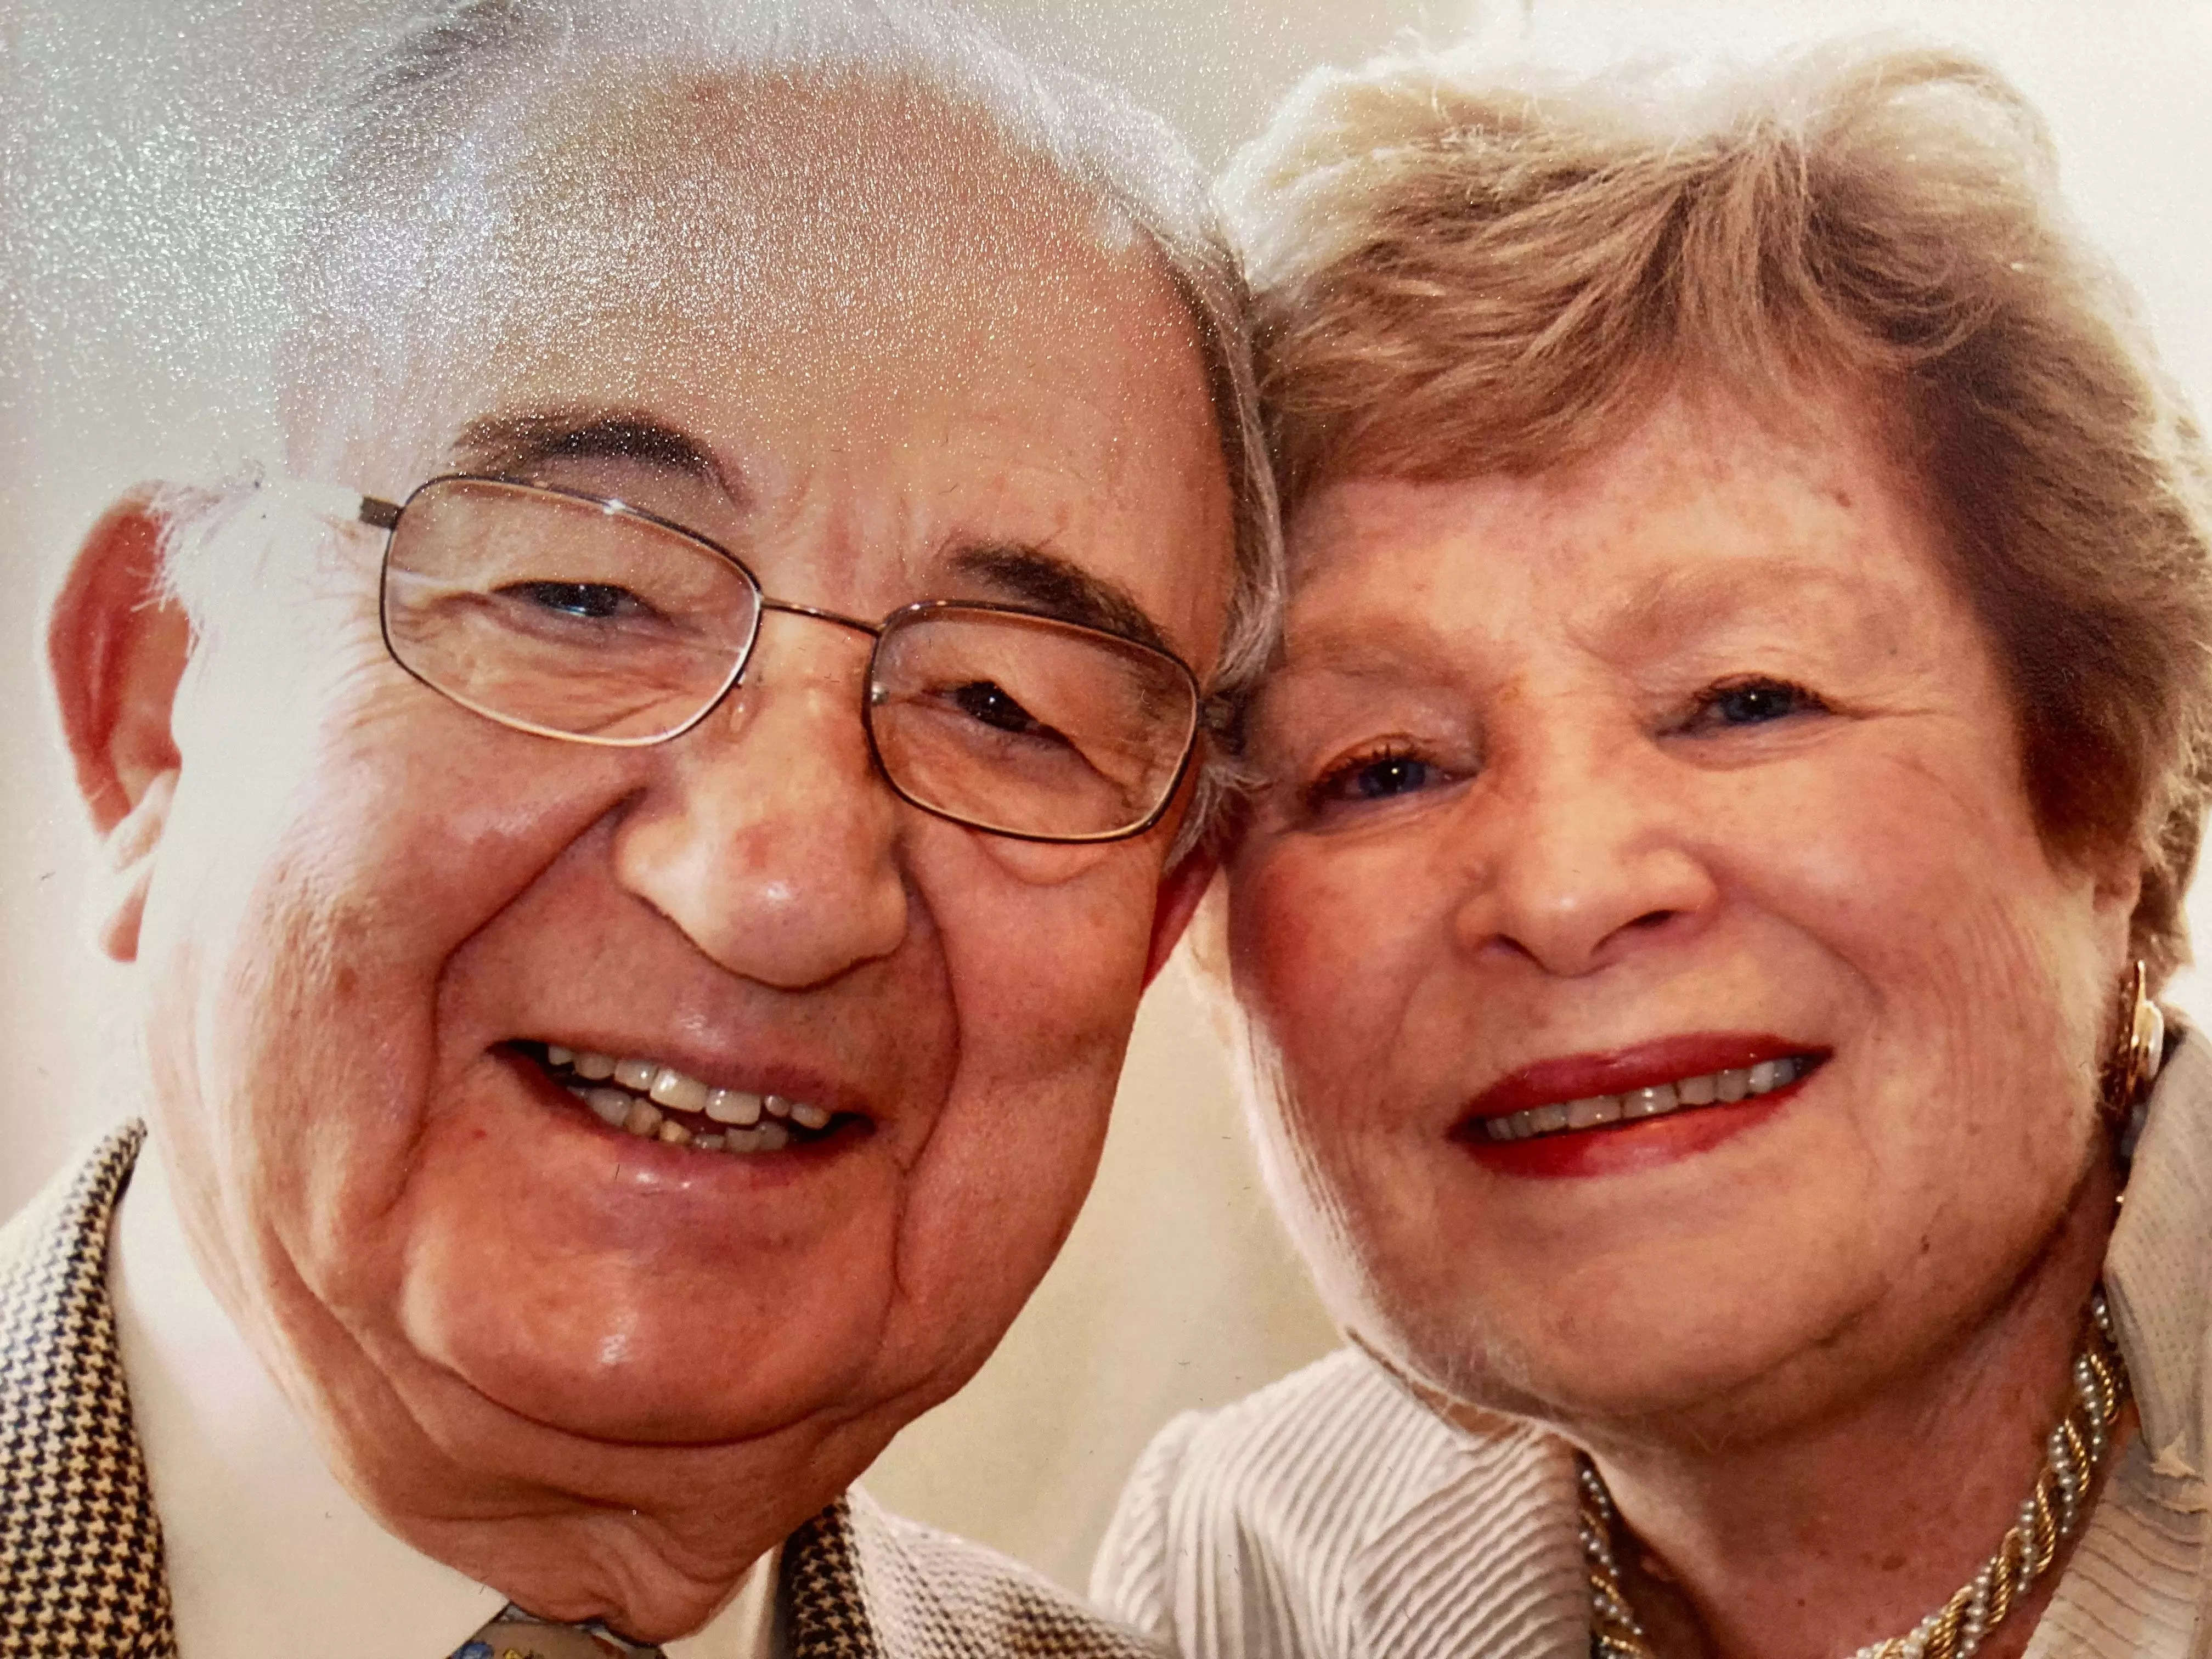 An older couple poses with their heads close together.